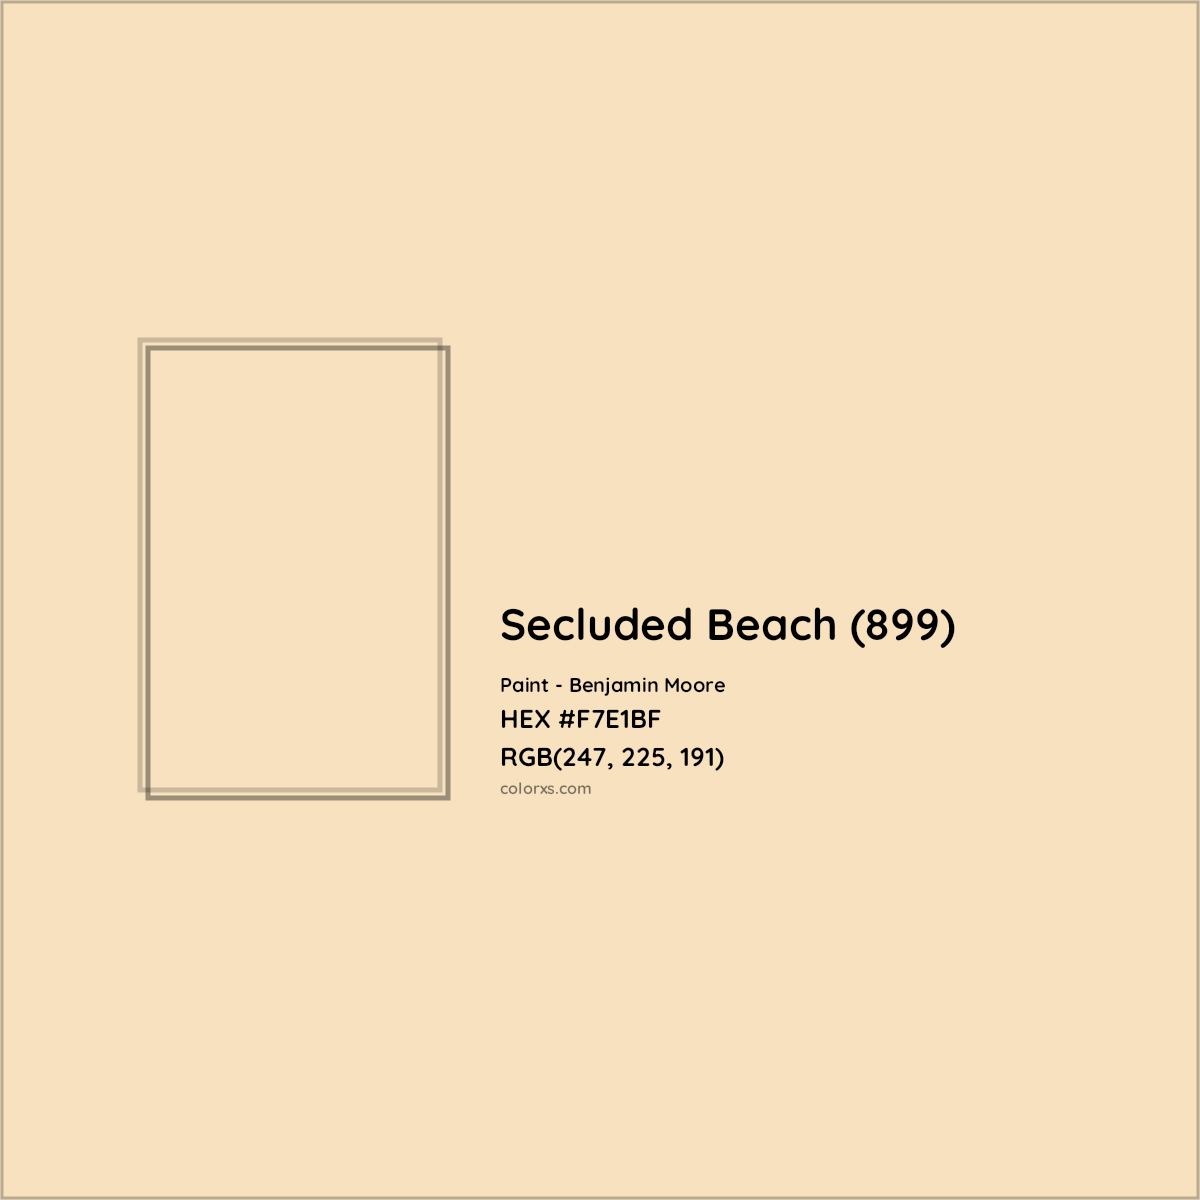 HEX #F7E1BF Secluded Beach (899) Paint Benjamin Moore - Color Code